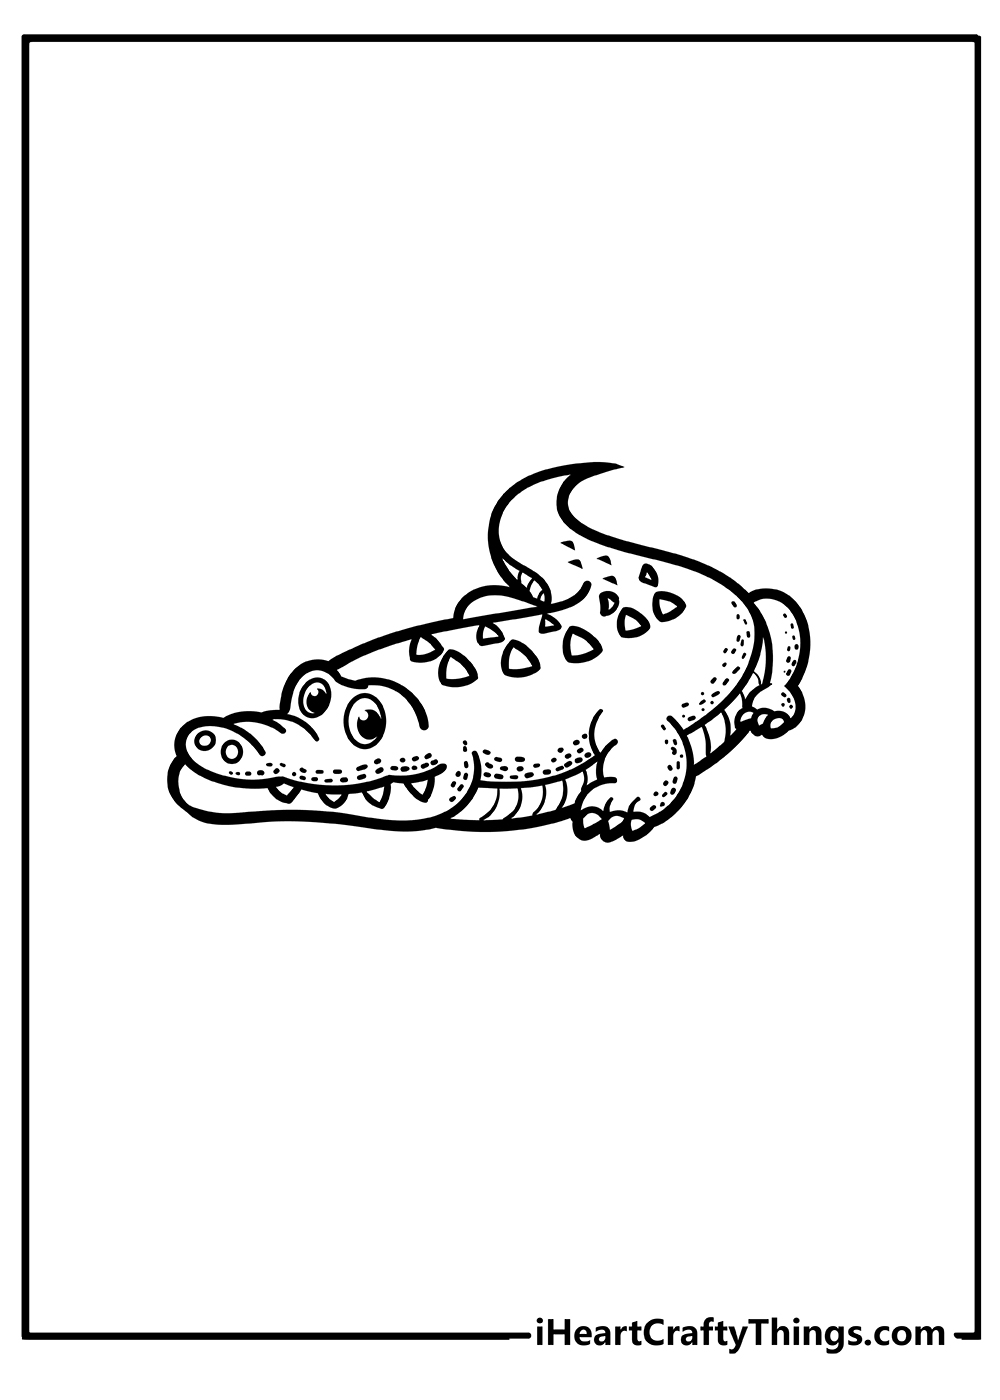 Crocodile Easy Coloring Pages